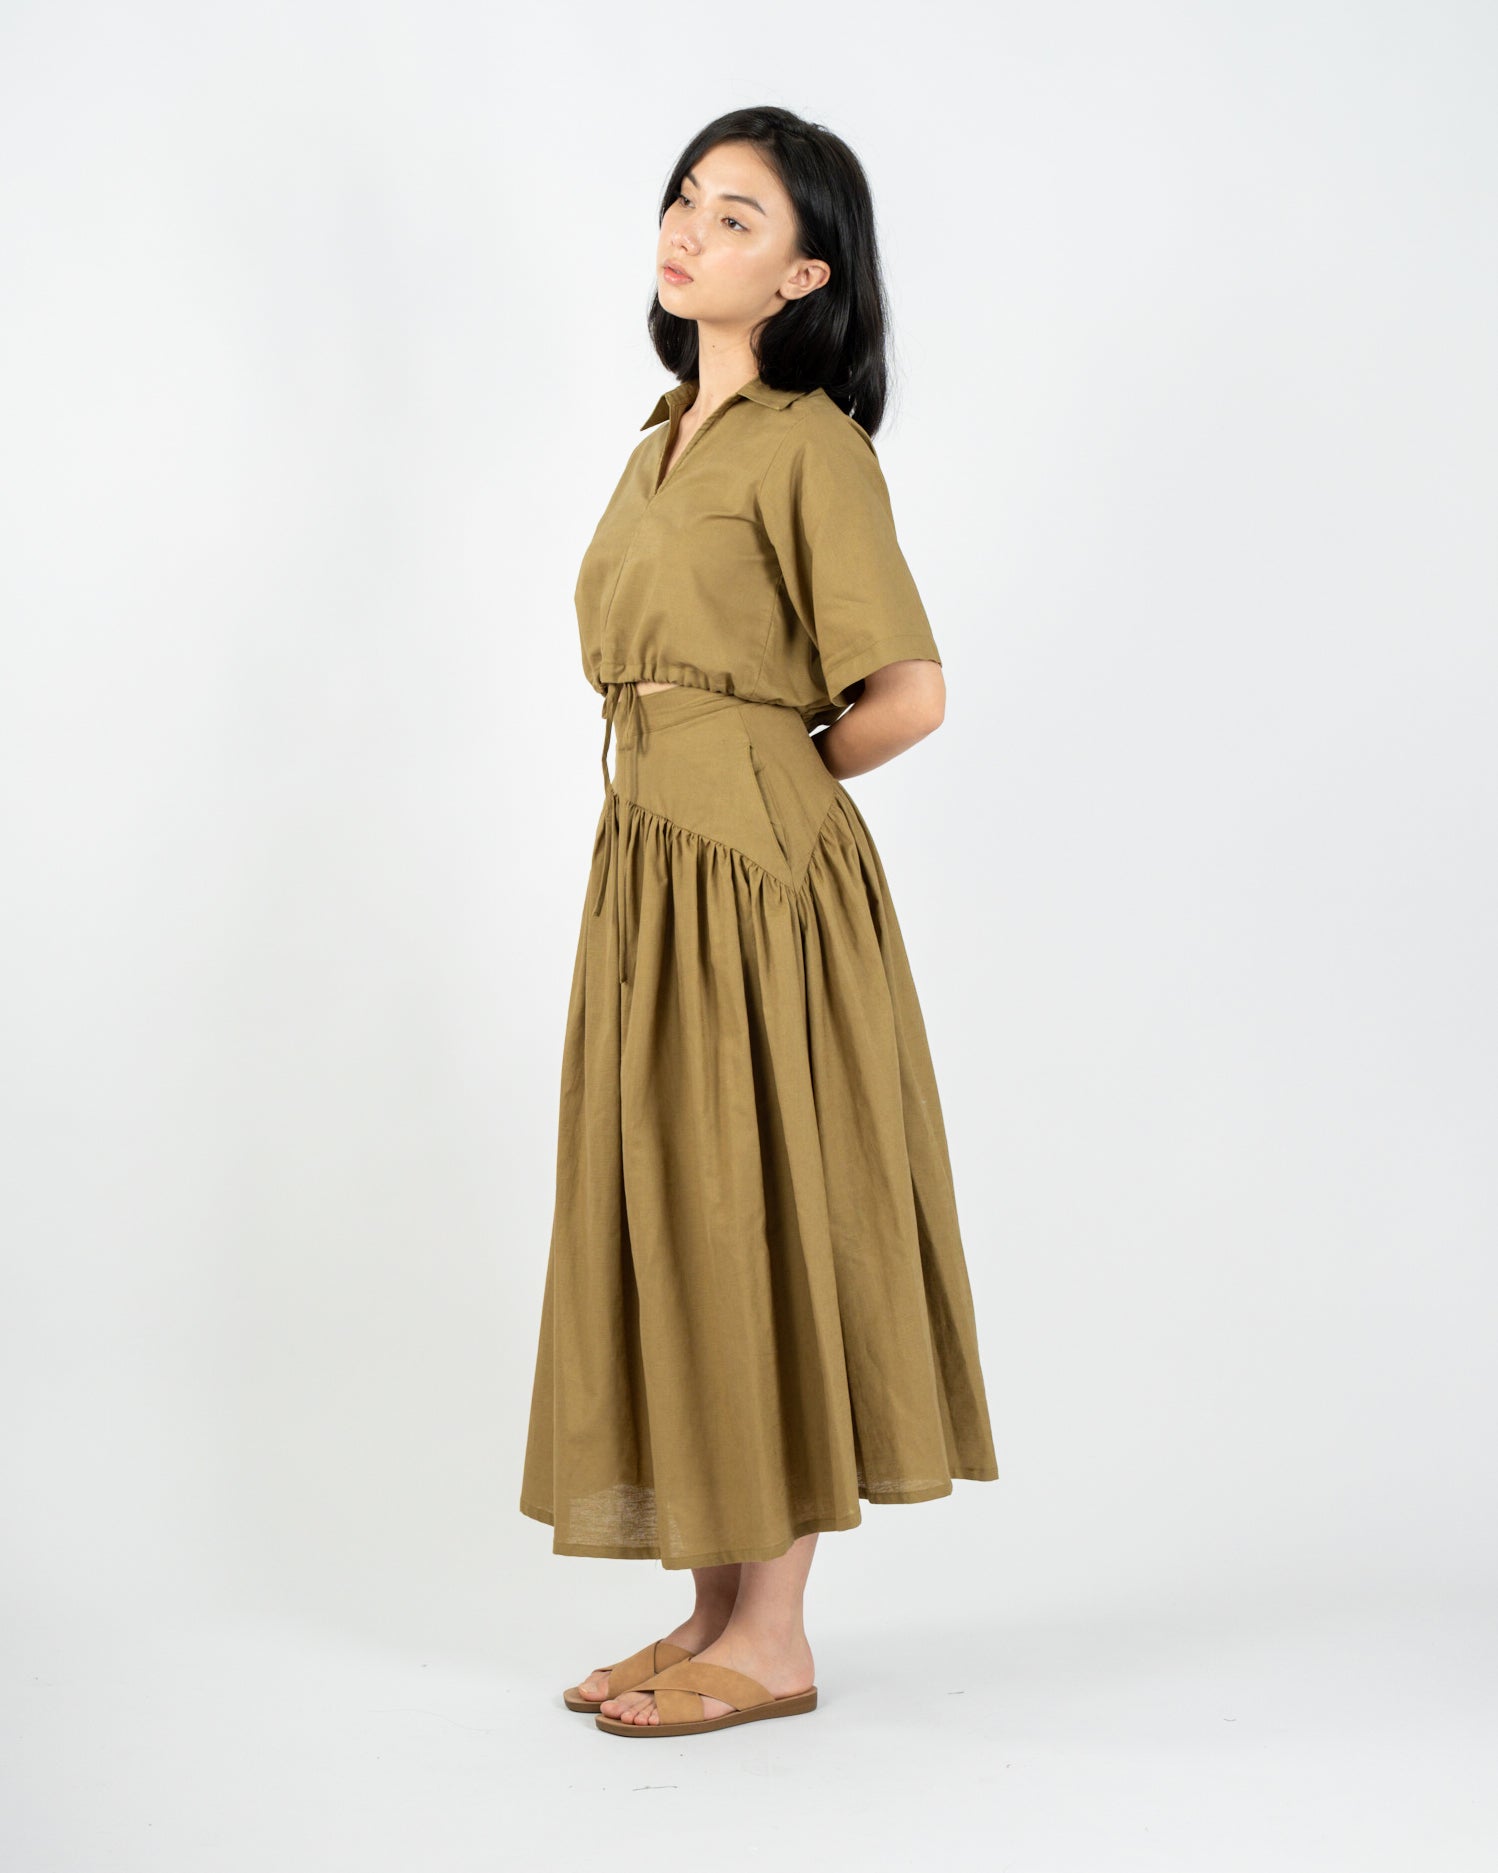 ASYMMETRICAL GATHERED SKIRT in olive